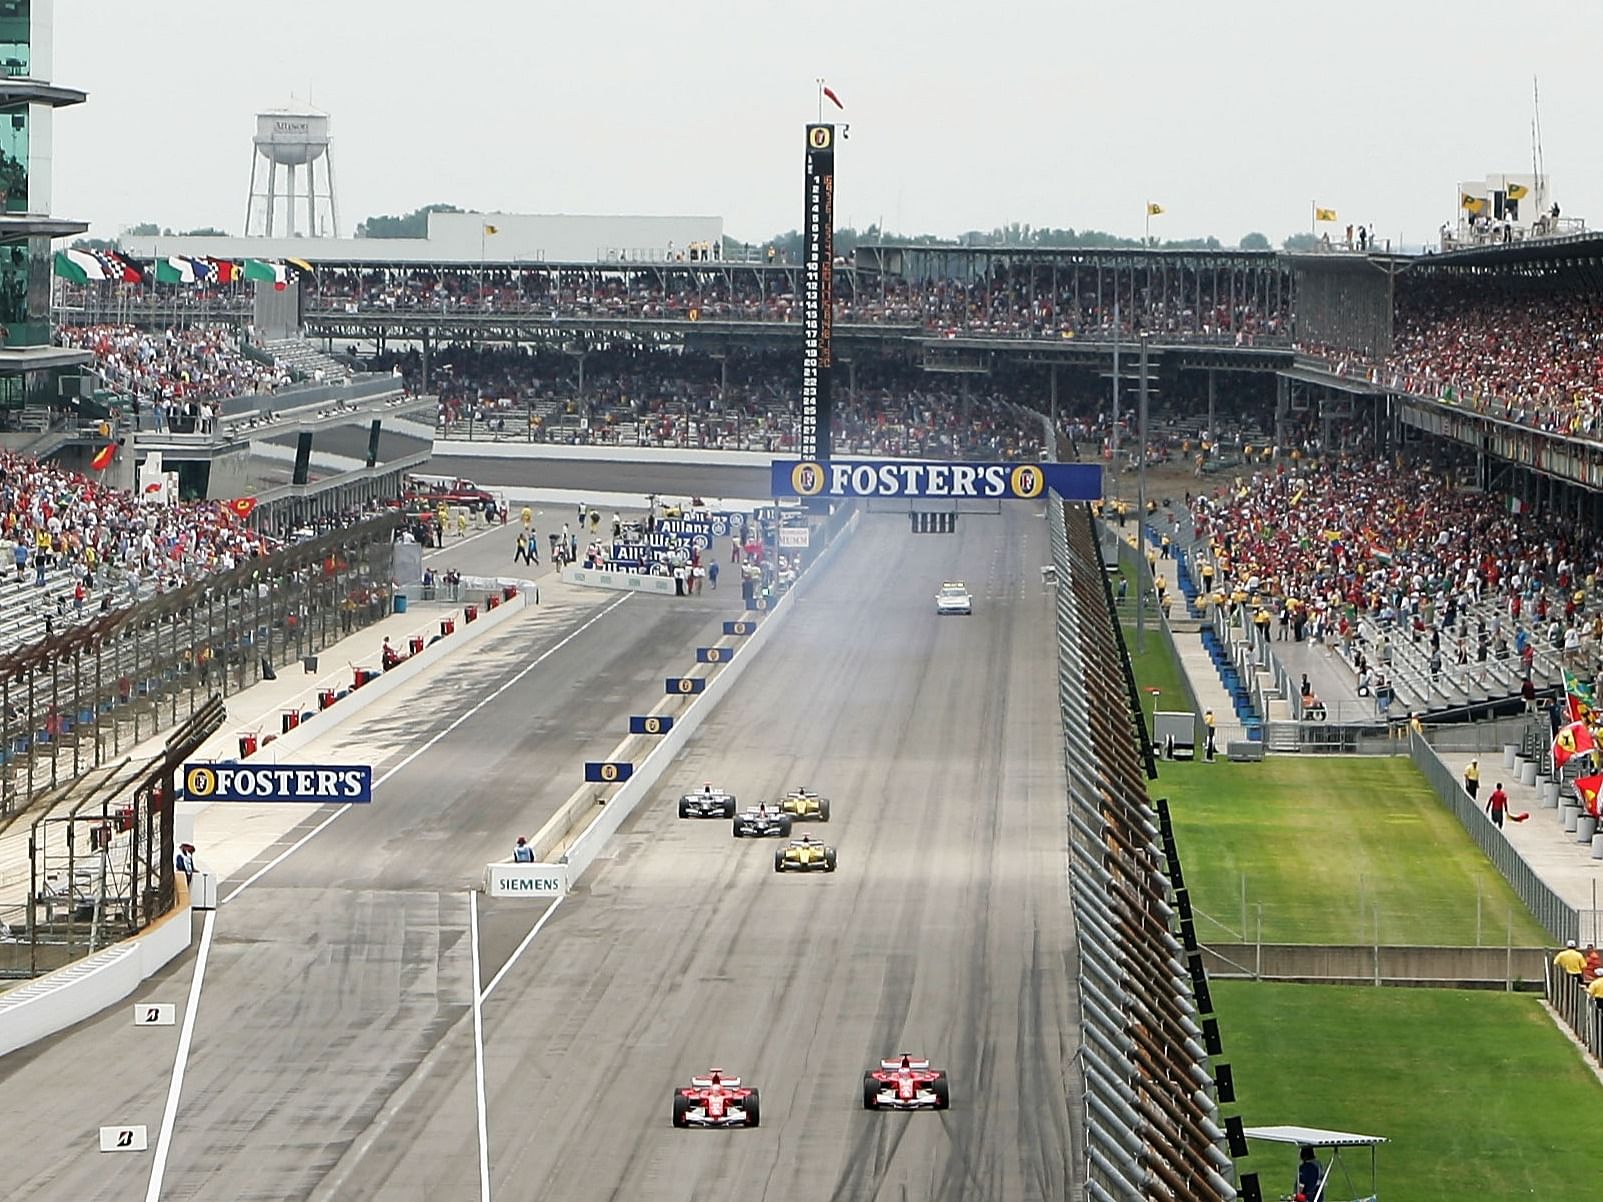 Only Ferrari, Minardi, and Jordan drivers race as the teams with Michelin tires all come into the pits to retire after one lap during the 2005 F1 United States Grand Prix. (Photo by Christopher Lee/Getty Images)